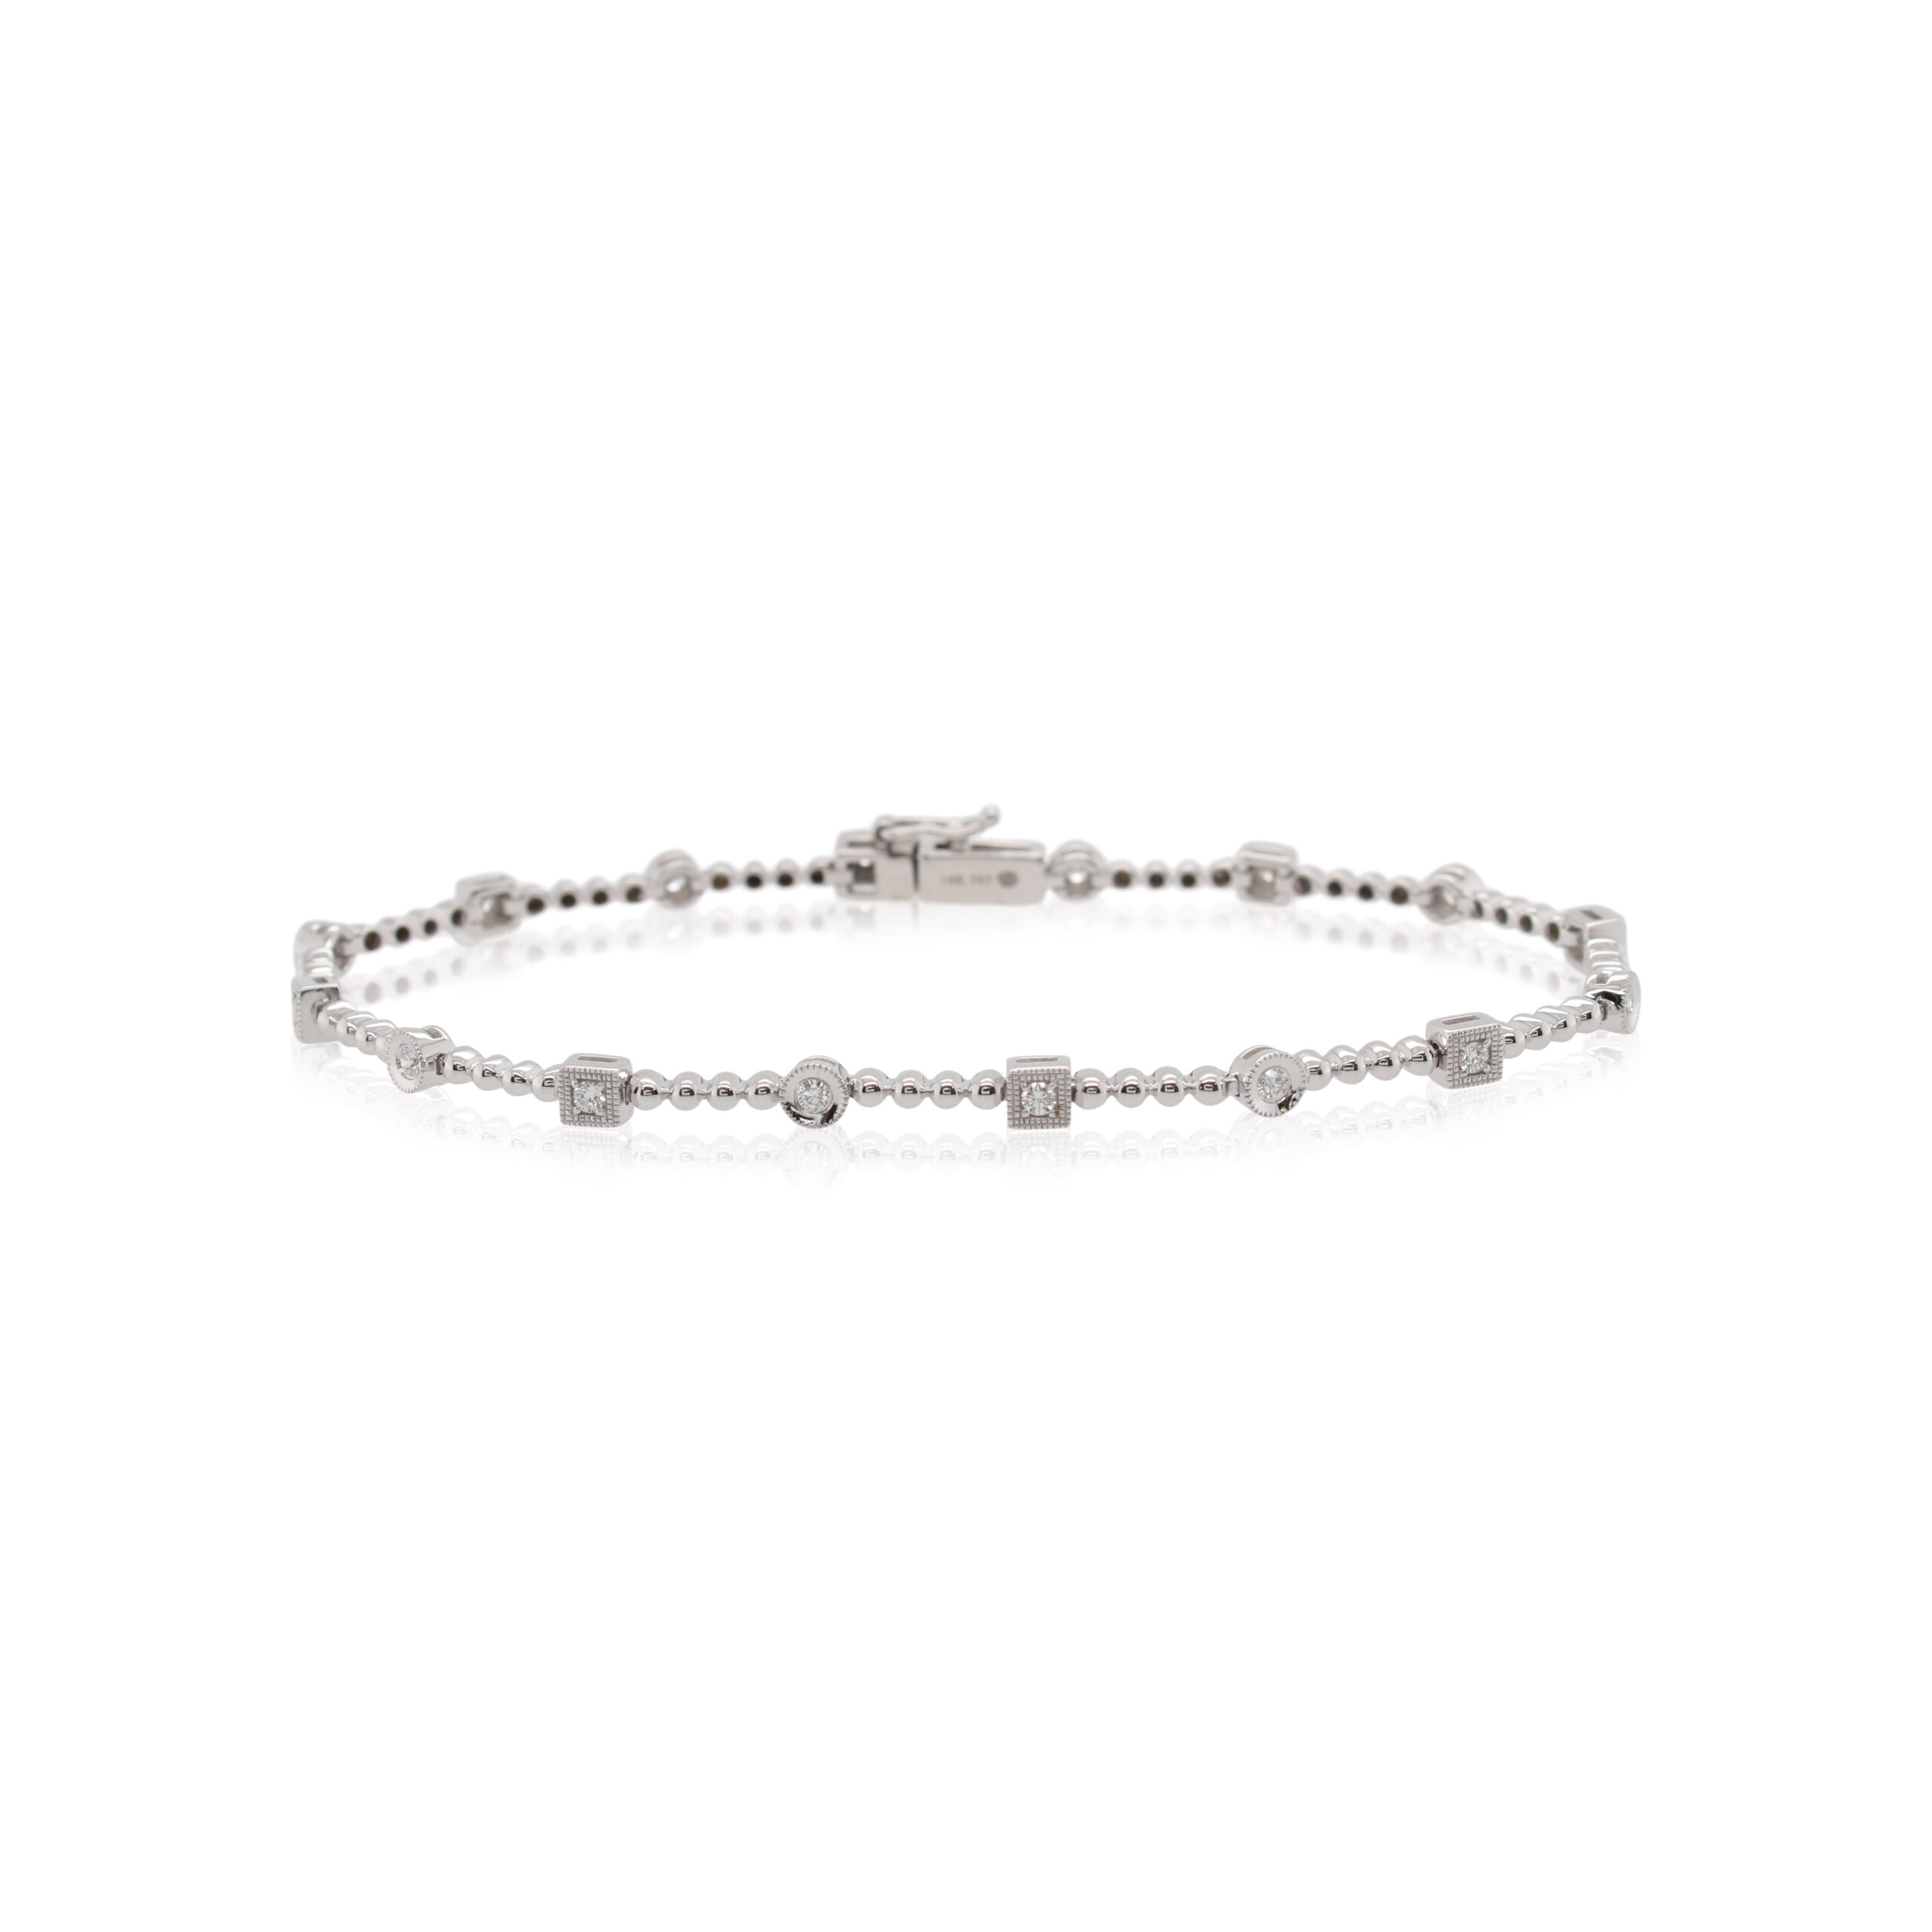 This bracelet from In Style by Rafael is crafted from 14k white gold and features 0.36 total carats of diamonds.